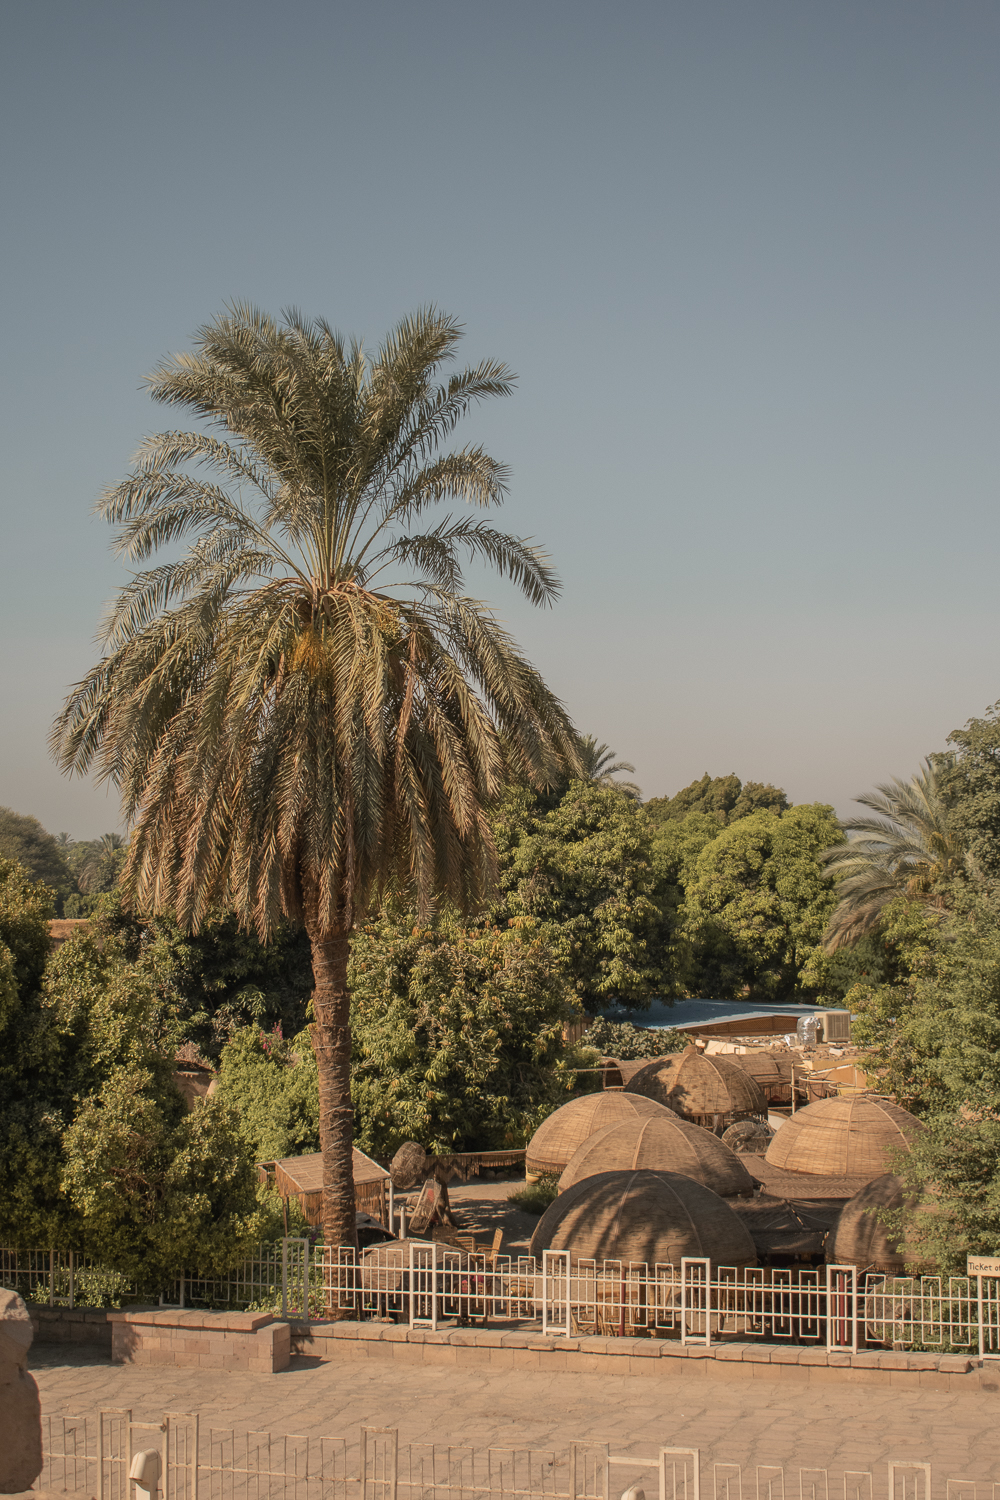 instagrammable places in Egypt